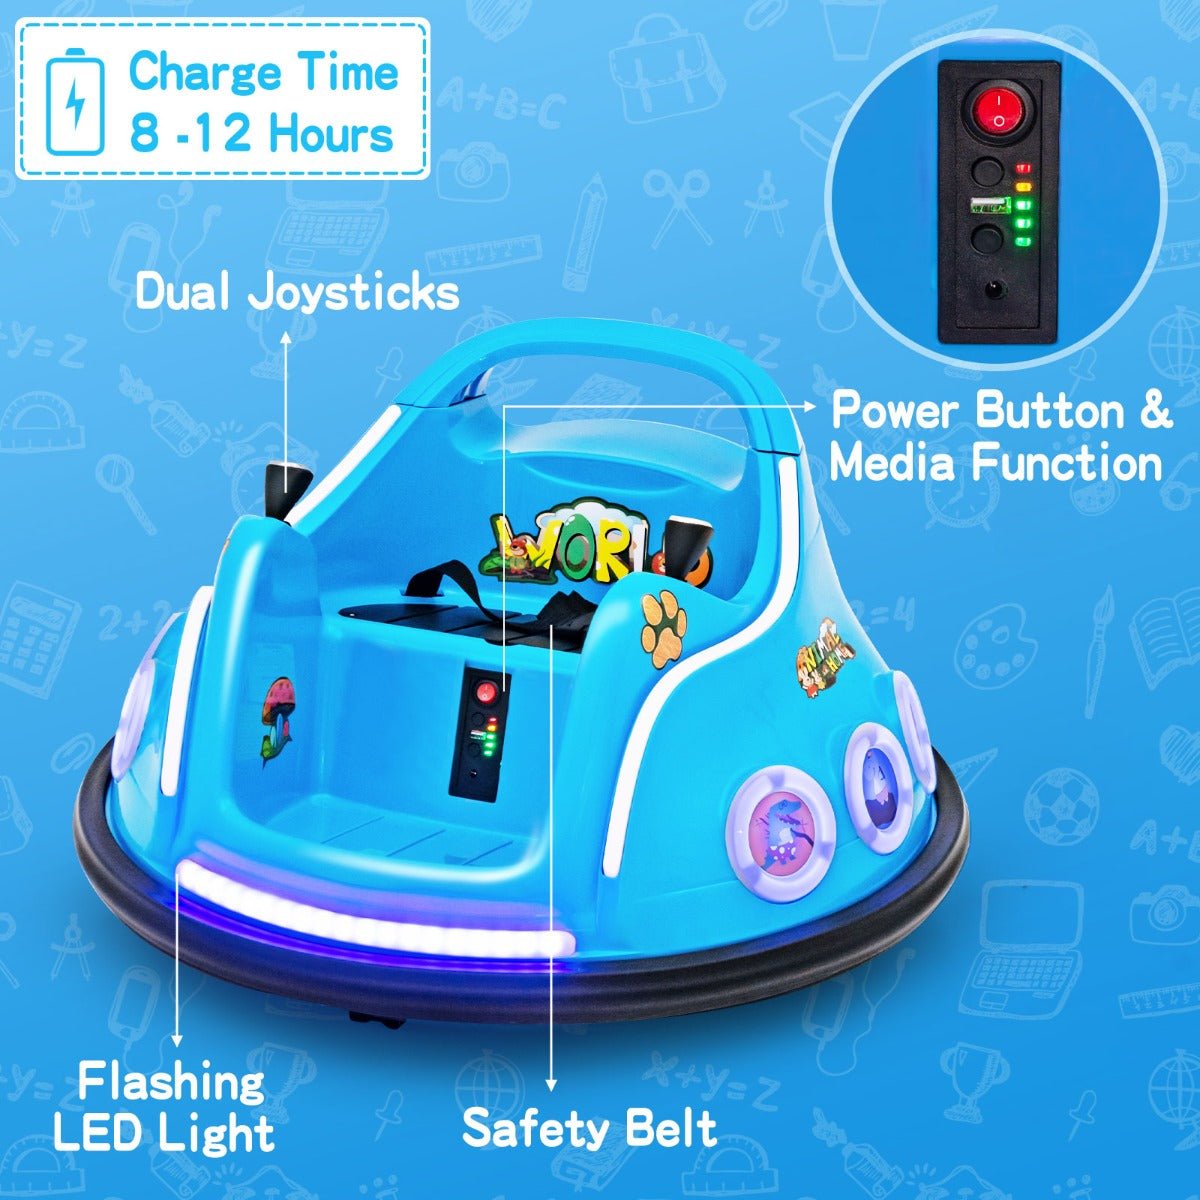 Buy the Blue Electric Bumper Car - Fun and Thrills Await